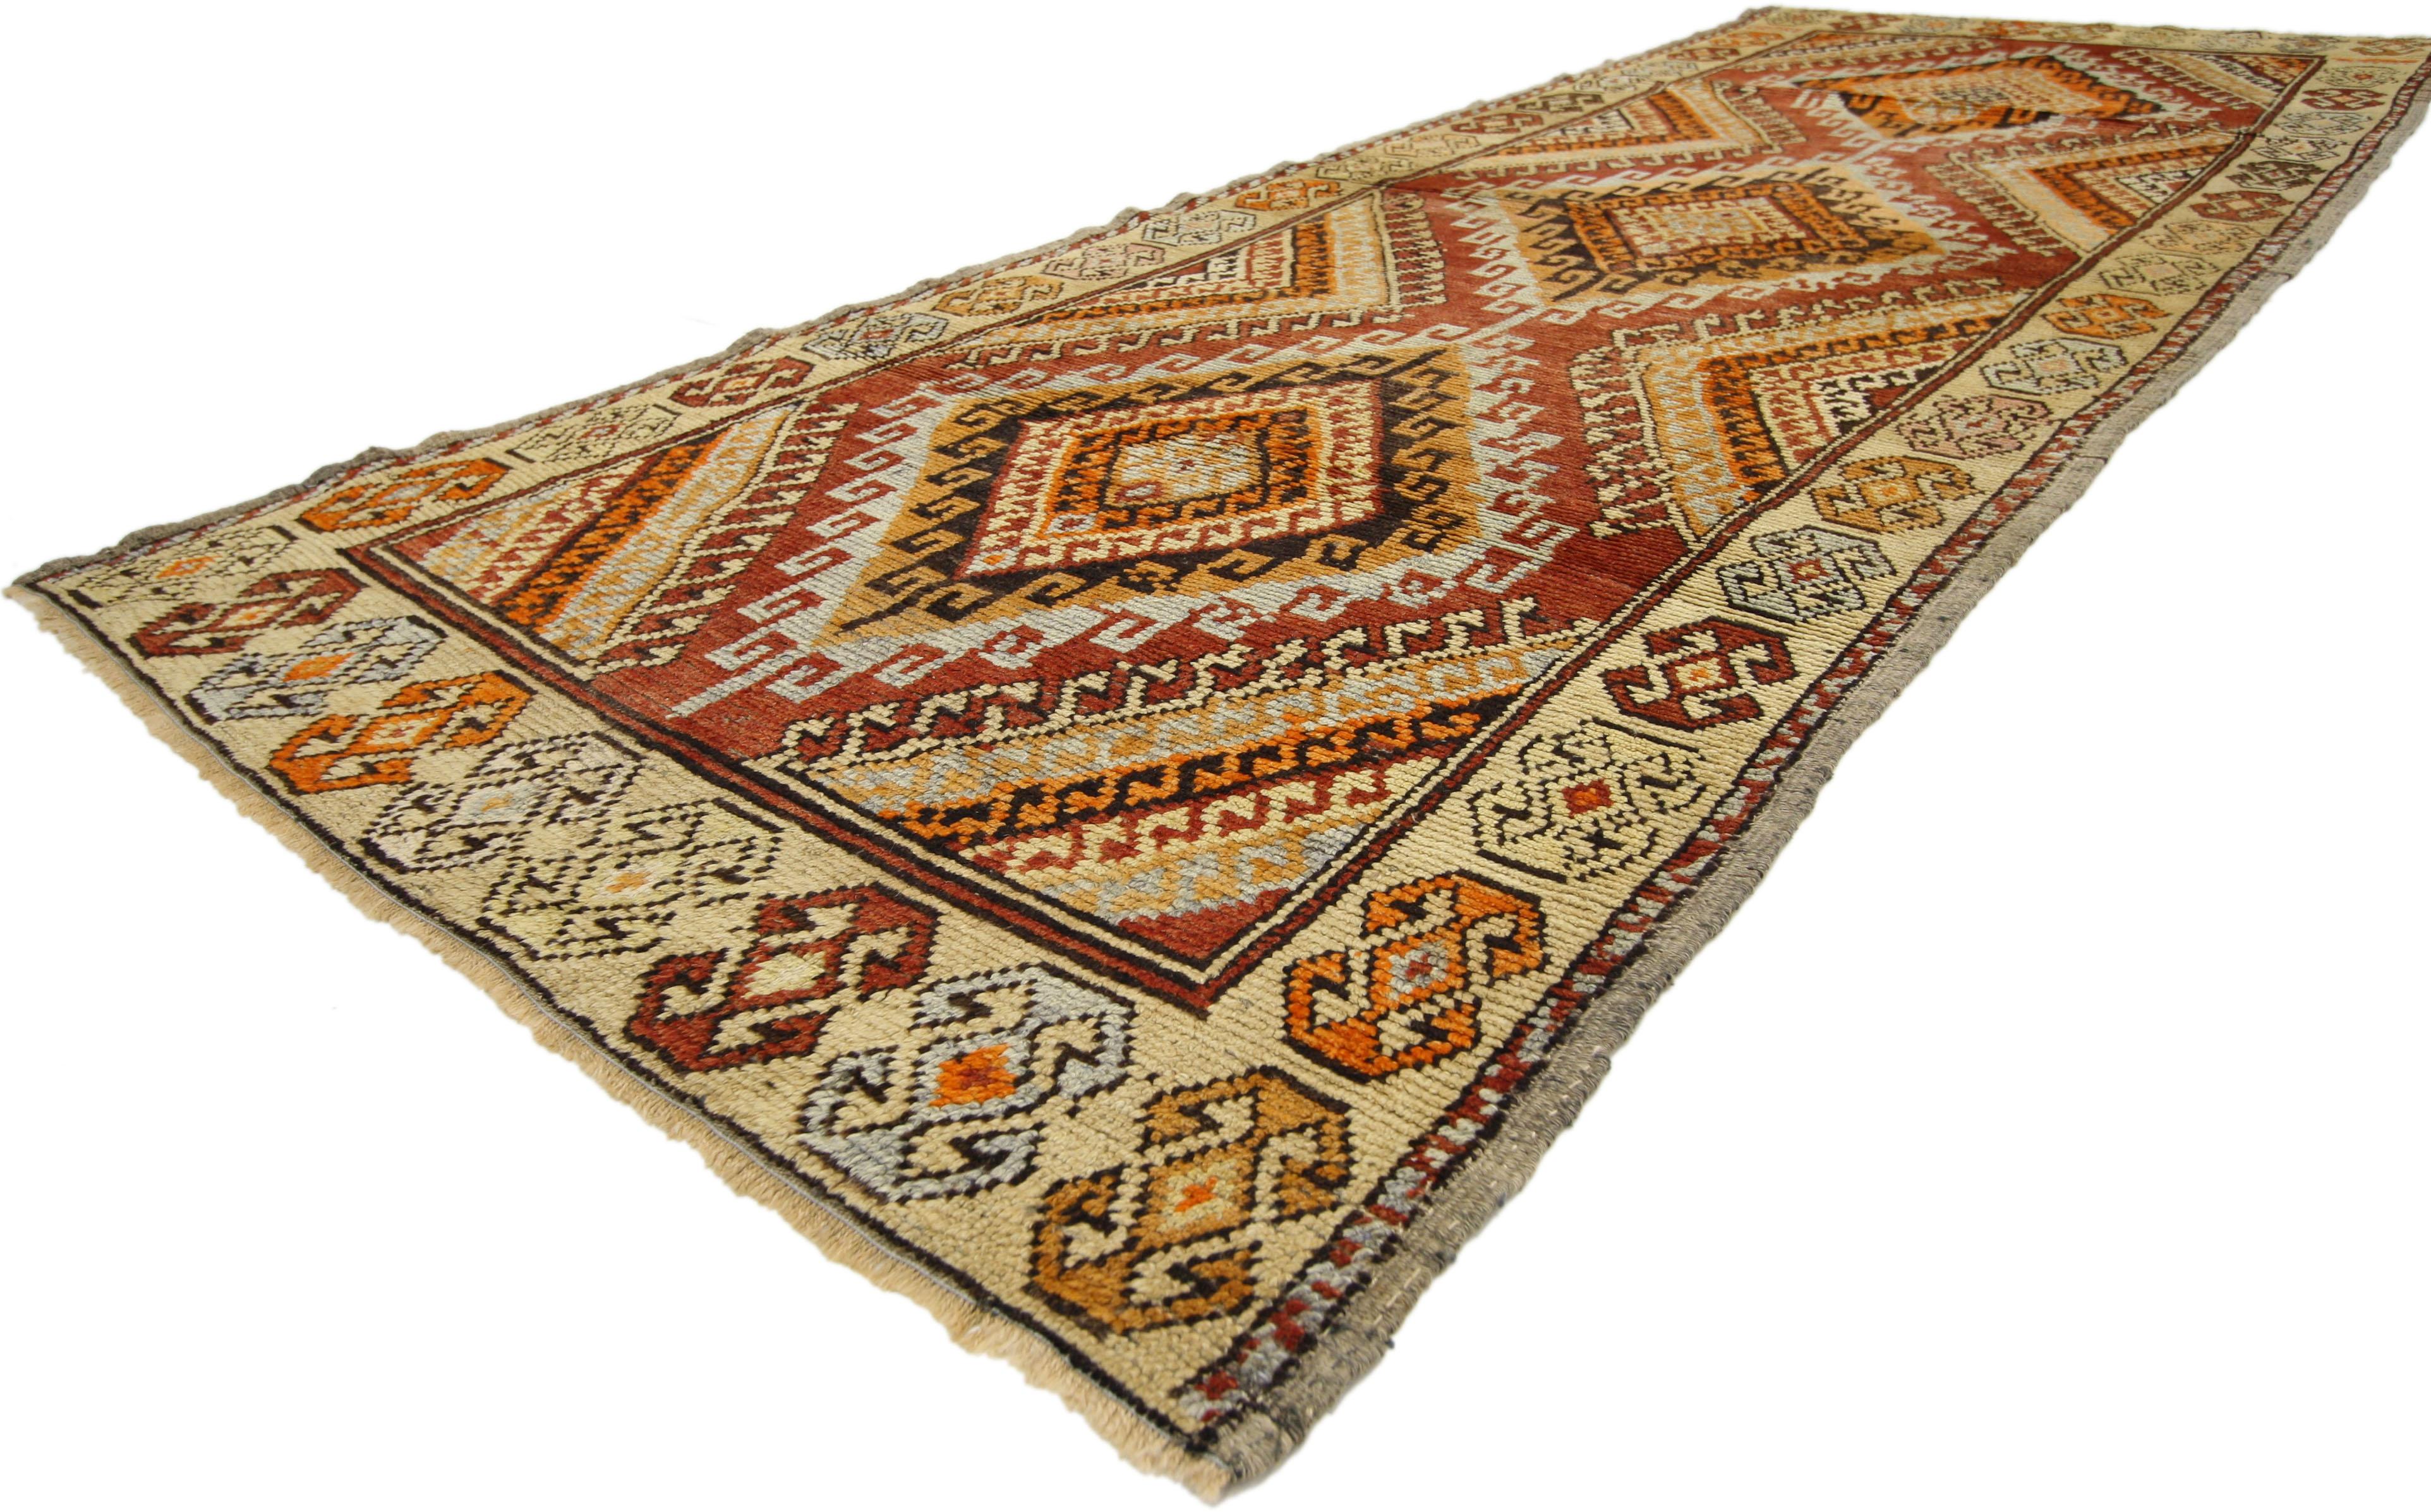 50358 Rustic style vintage Turkish Oushak Carpet Runner with Modern Tribal Design. This hand-knotted wool vintage Turkish Oushak runner features three stacked lozenge medallions with latch hook edges and steep latch hooked ziggurats protruding